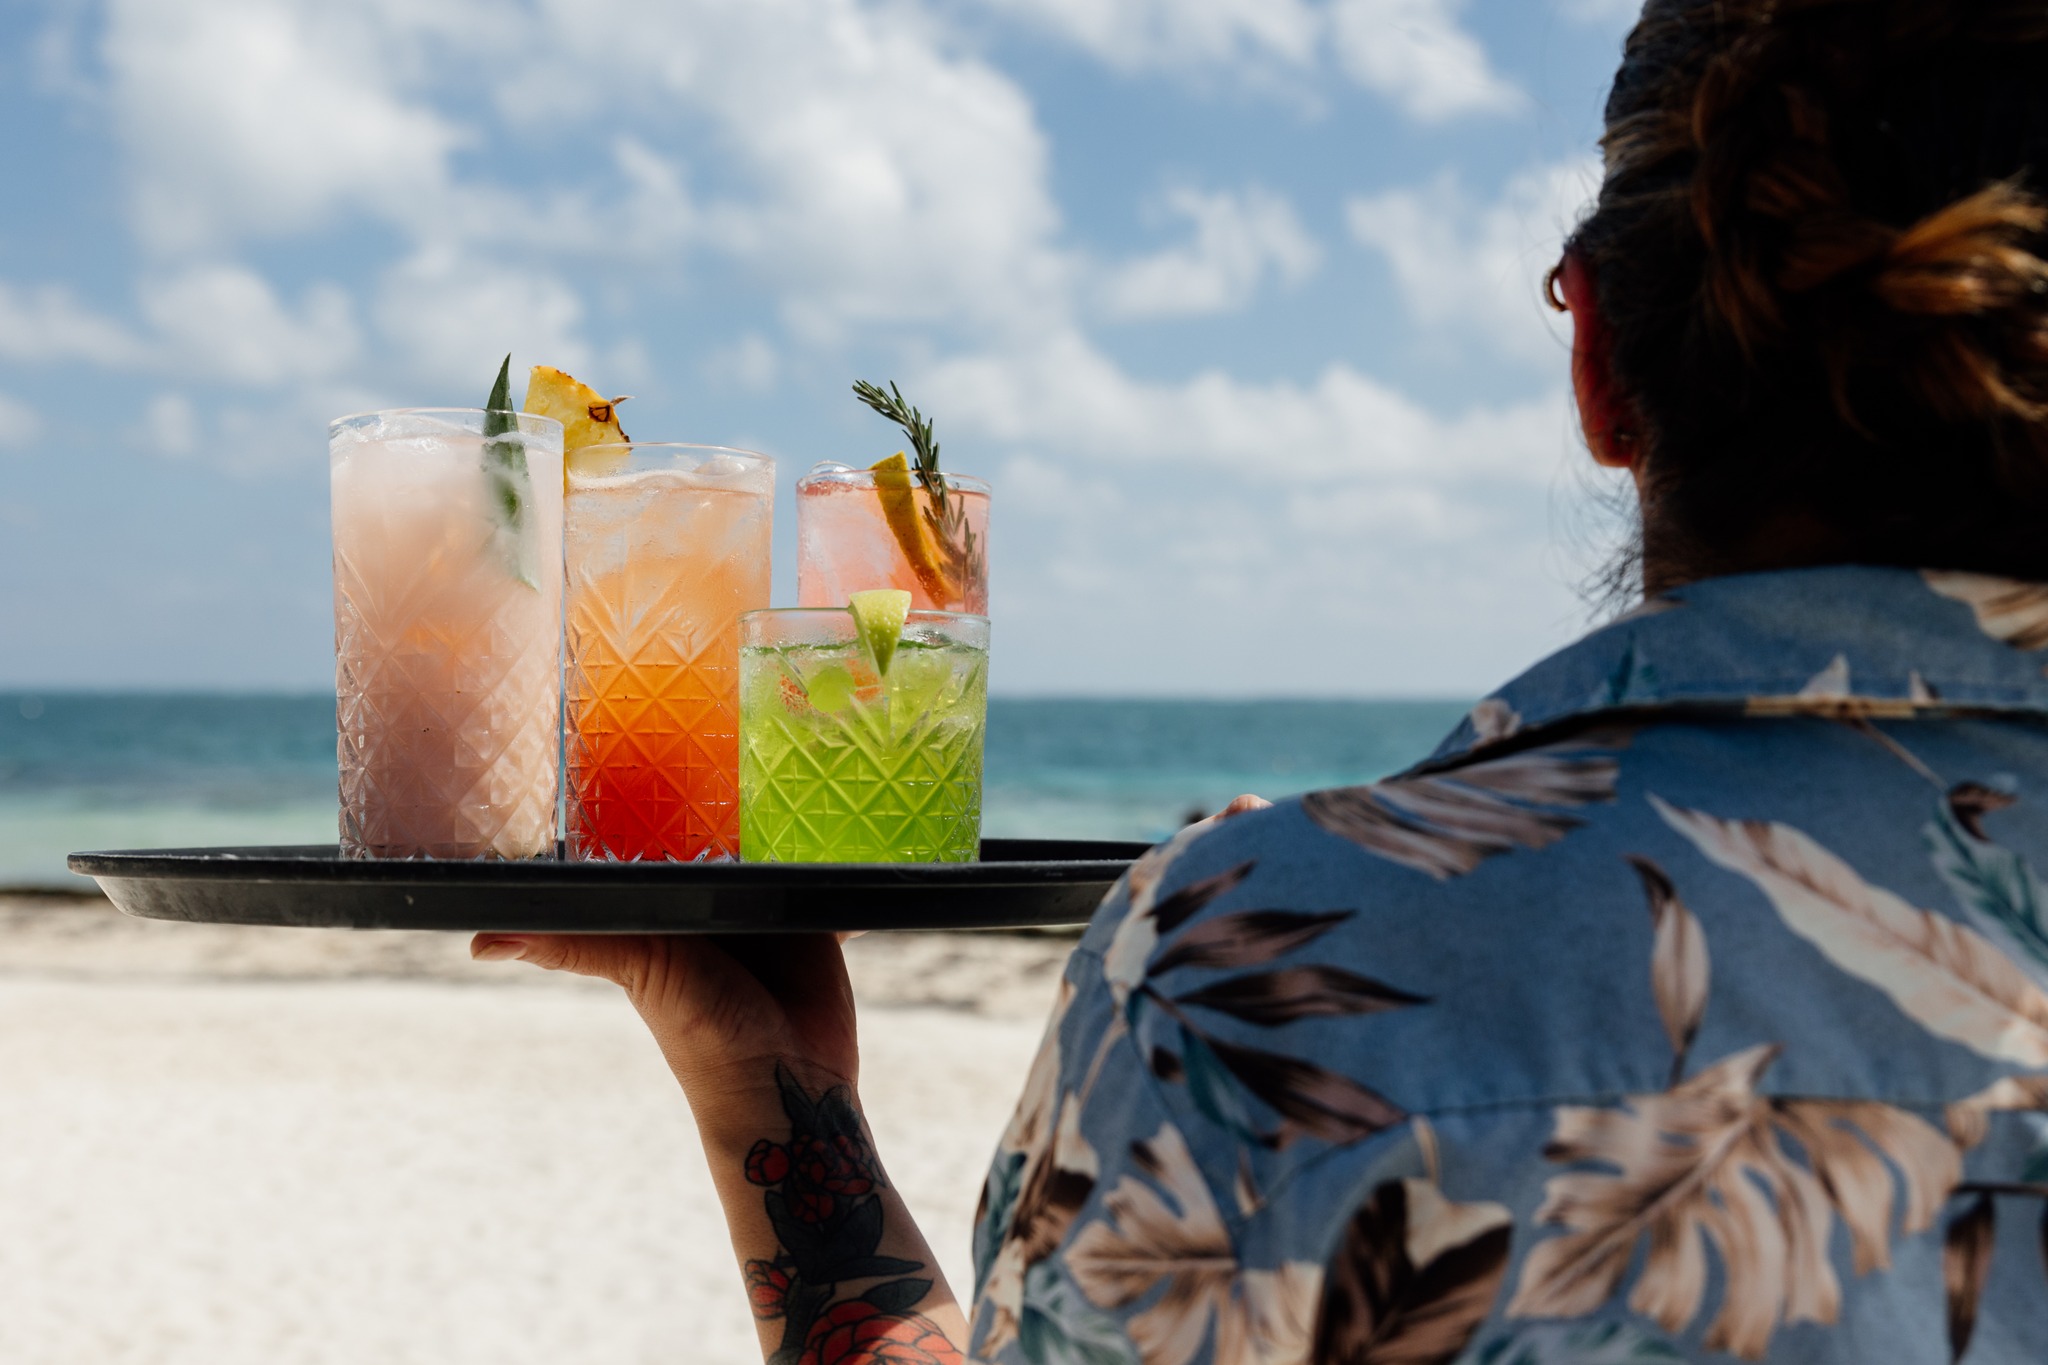 A waiter holds a serving tray with 4 colorful cocktails on it in front of the ocean at Unico Beach Club in Puerto Morelos.